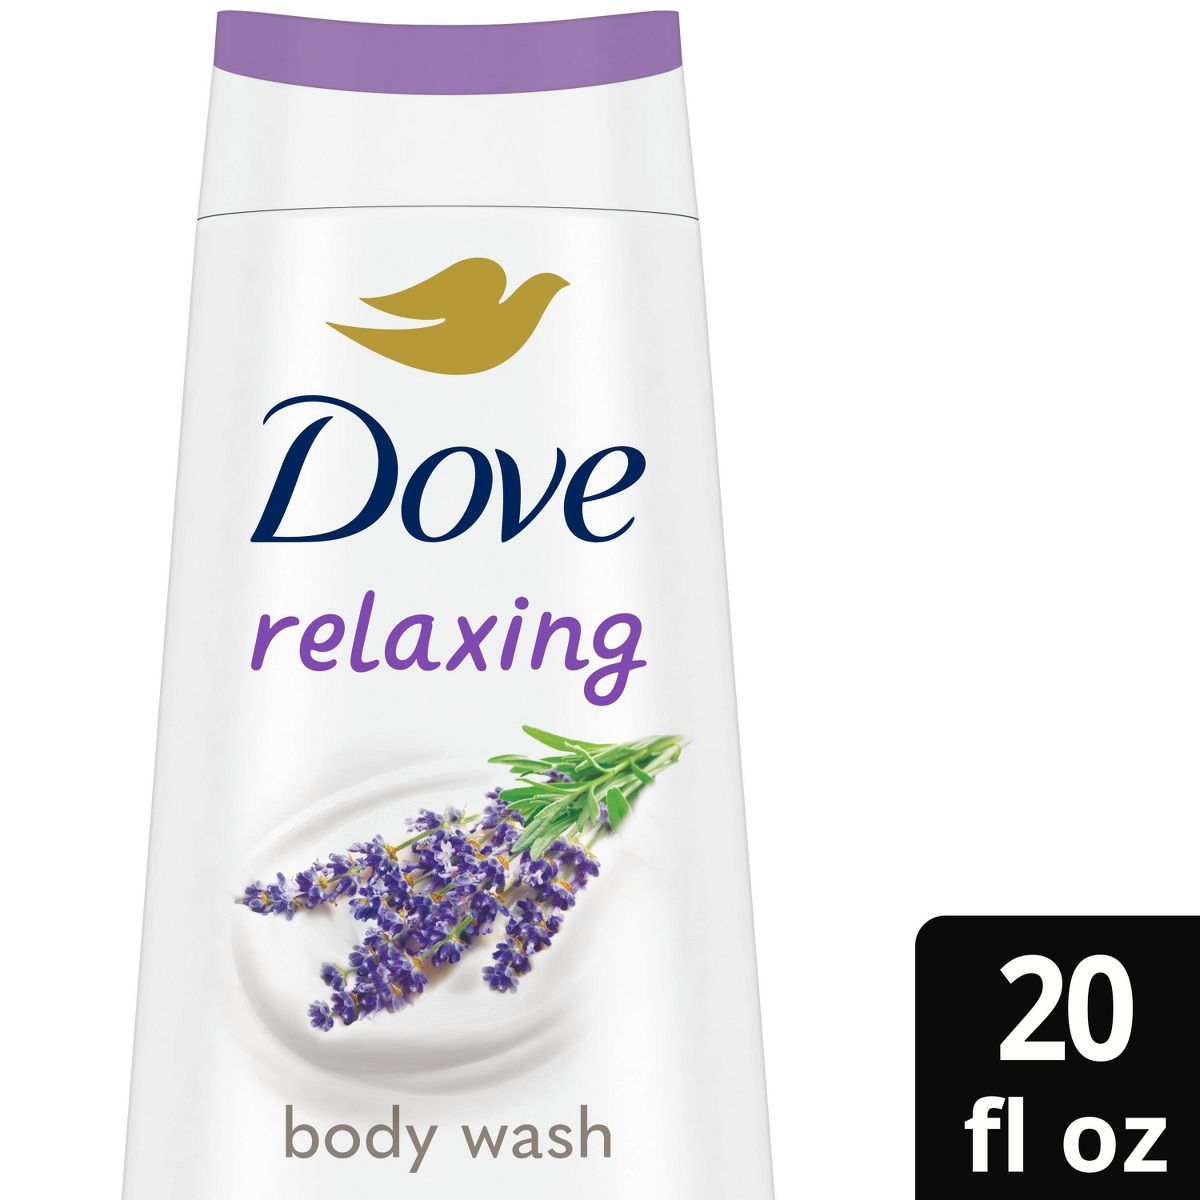 Dove Relaxing Body Wash - Lavender & Chamomile - 20 fl oz | Target